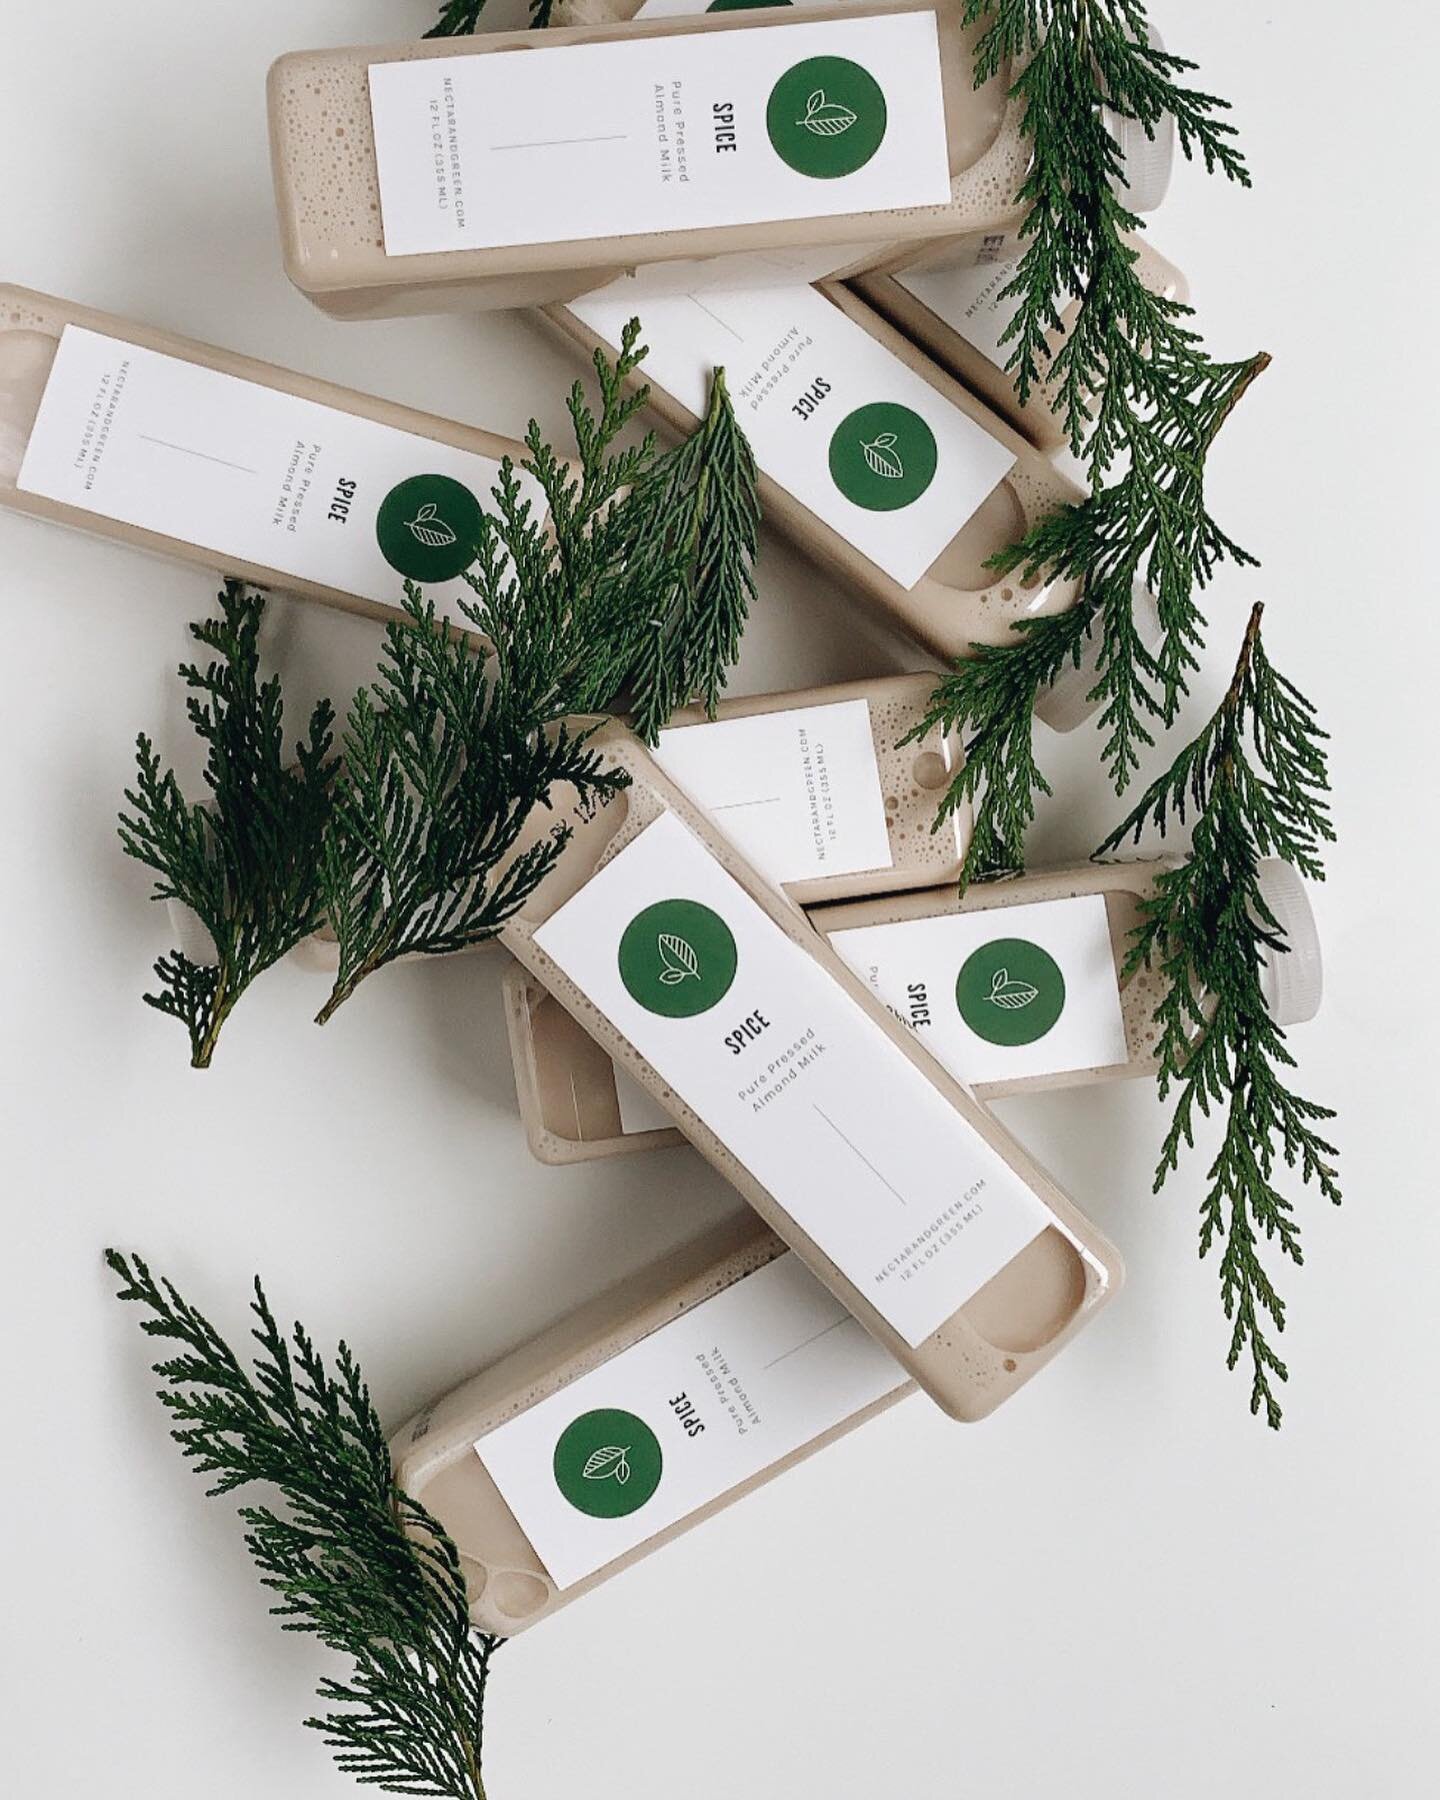 When @nectarandgreen's Spice returns, you know the holidays are officially here! 🌲 The most delicious blend of nutmeg, cinnamon, clove, honey &amp; sea salt.